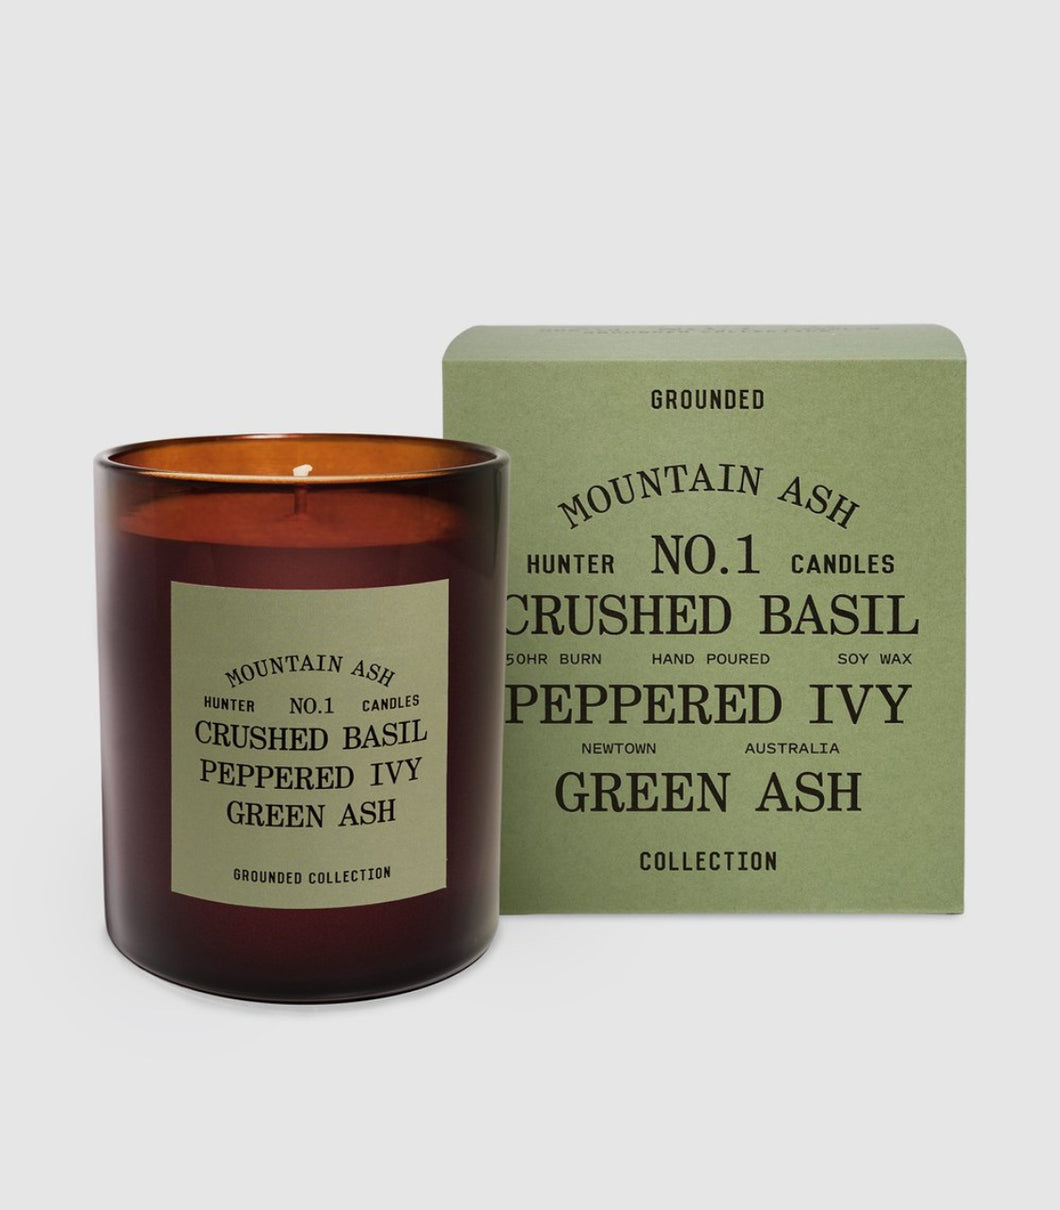 Hunter candle - NO. 1 MOUNTAIN ASH / CRUSHED BASIL, PEPPERED IVY, GREEN ASH